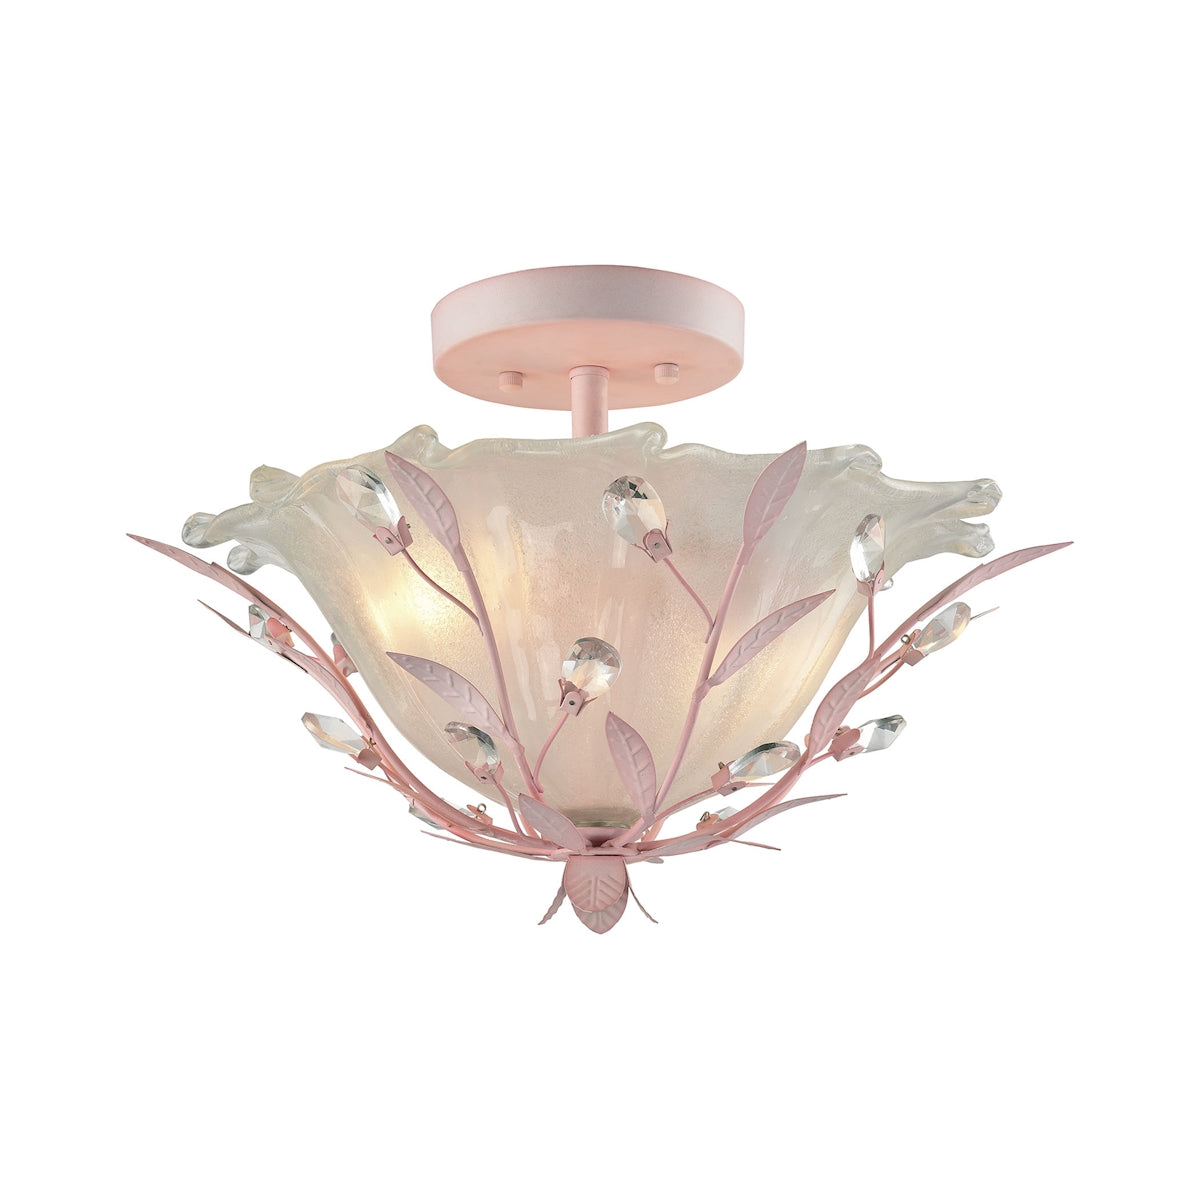 ELK Lighting 18151/2 Circeo 2-Light Semi Flush in Light Pink with Frosted Hand-formed Glass